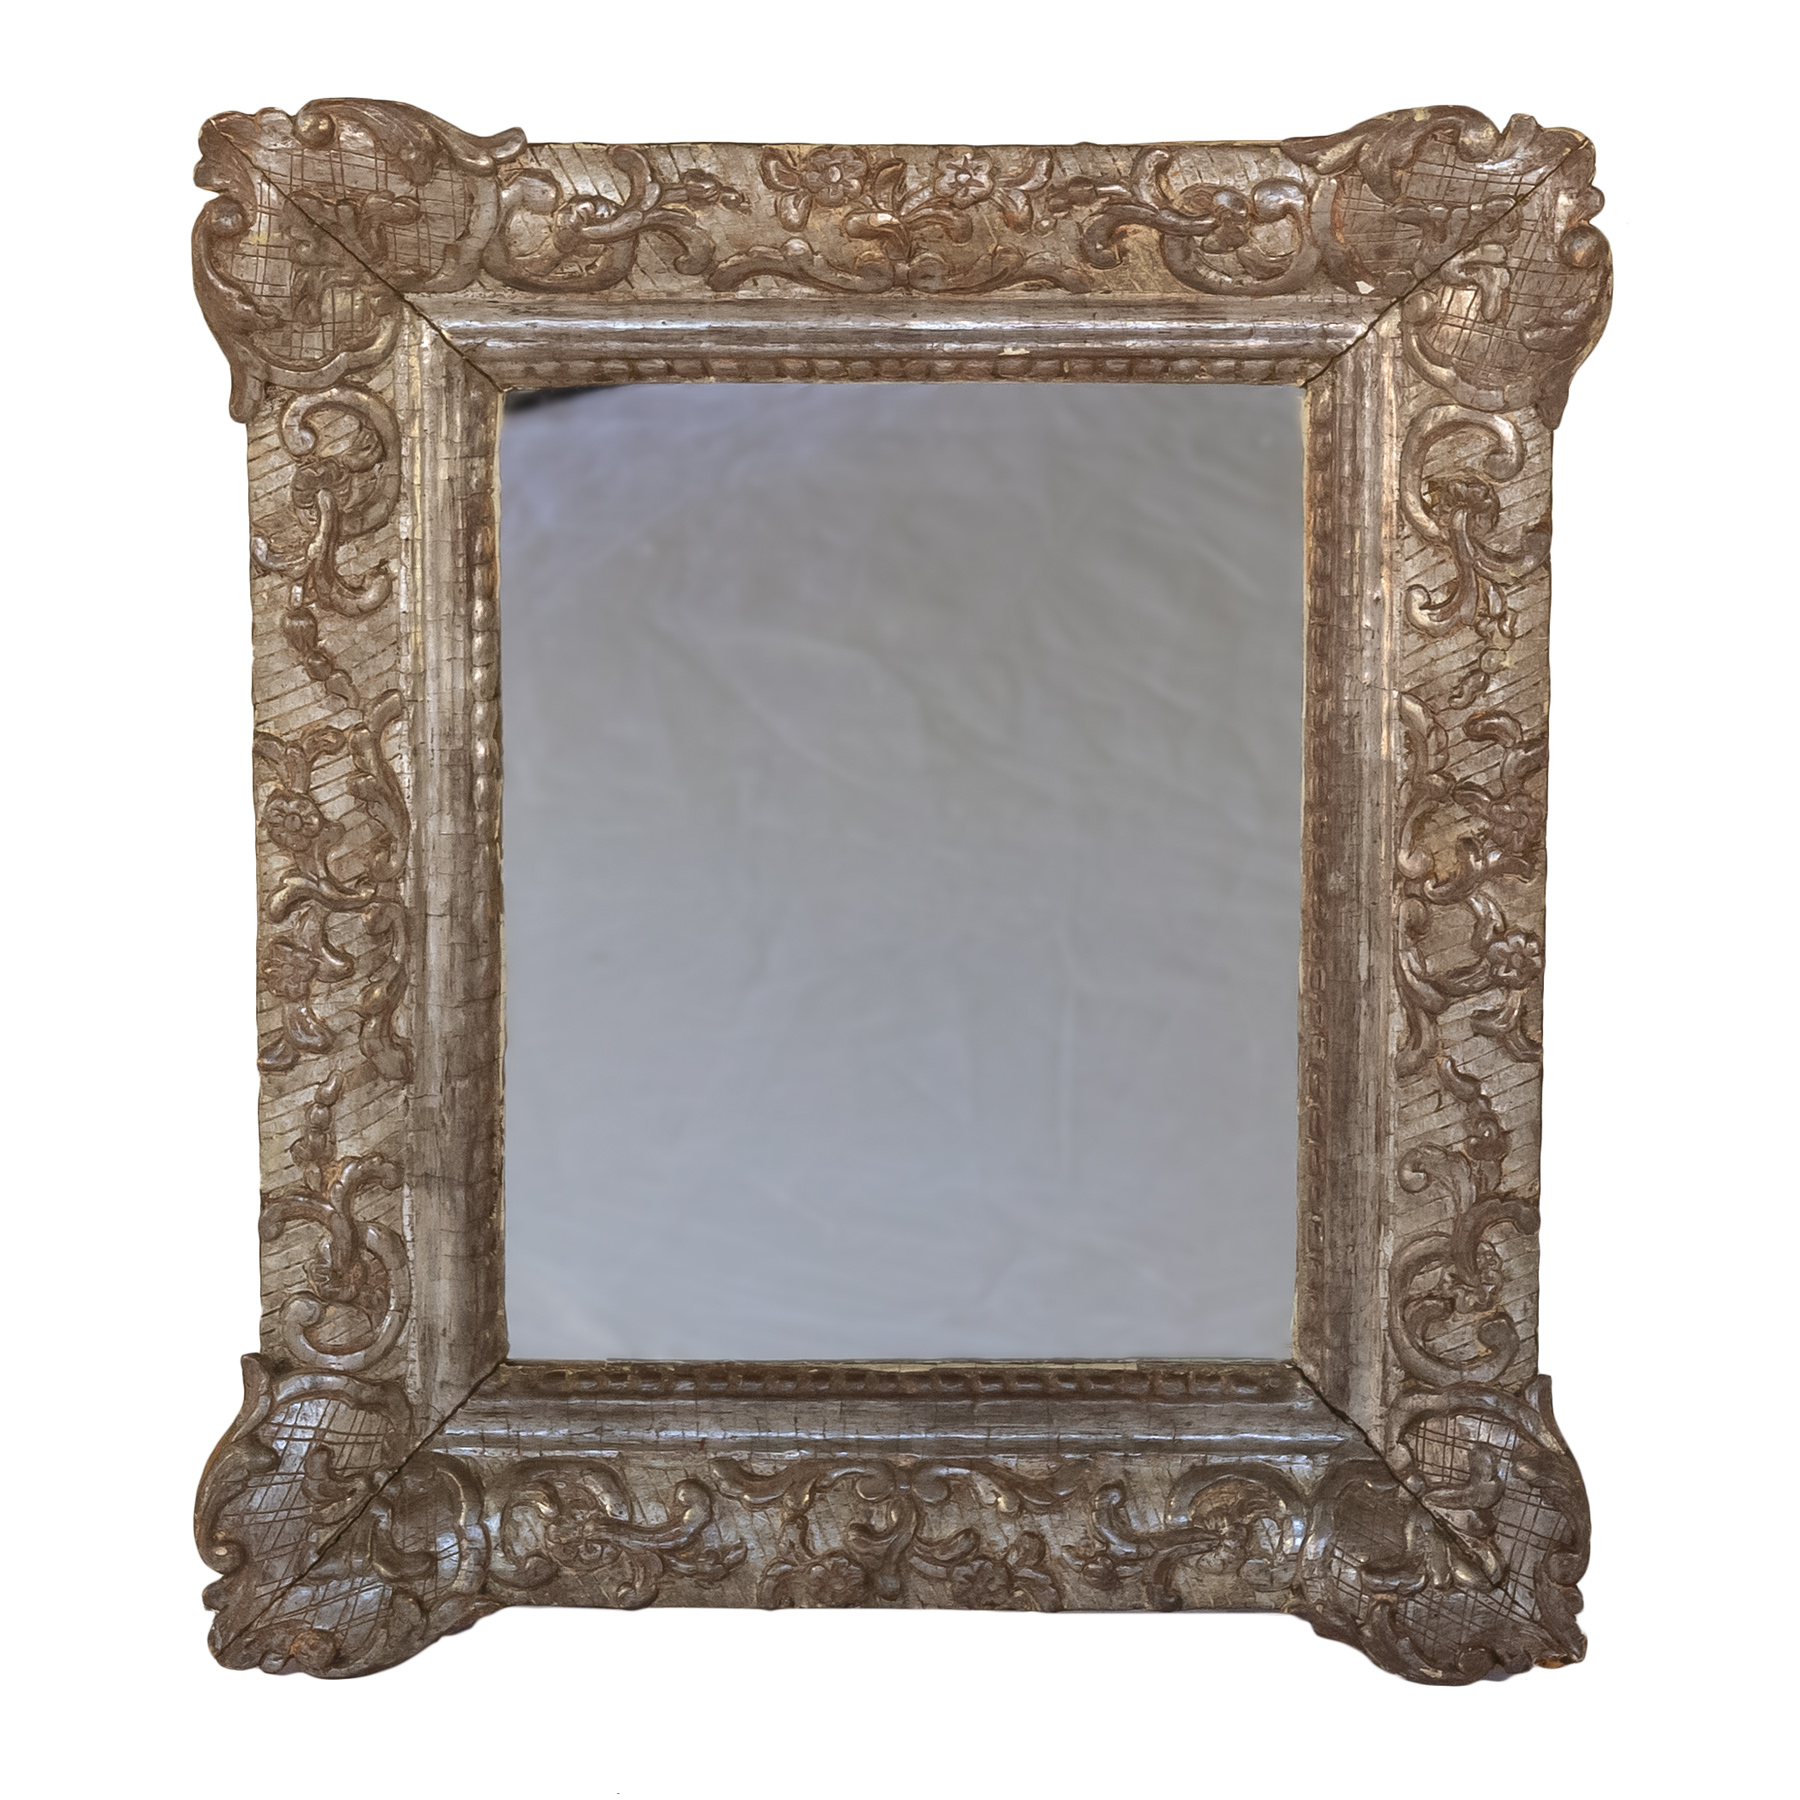 Small French Silver Gilt Mirror 19th Century (415) 355-1690